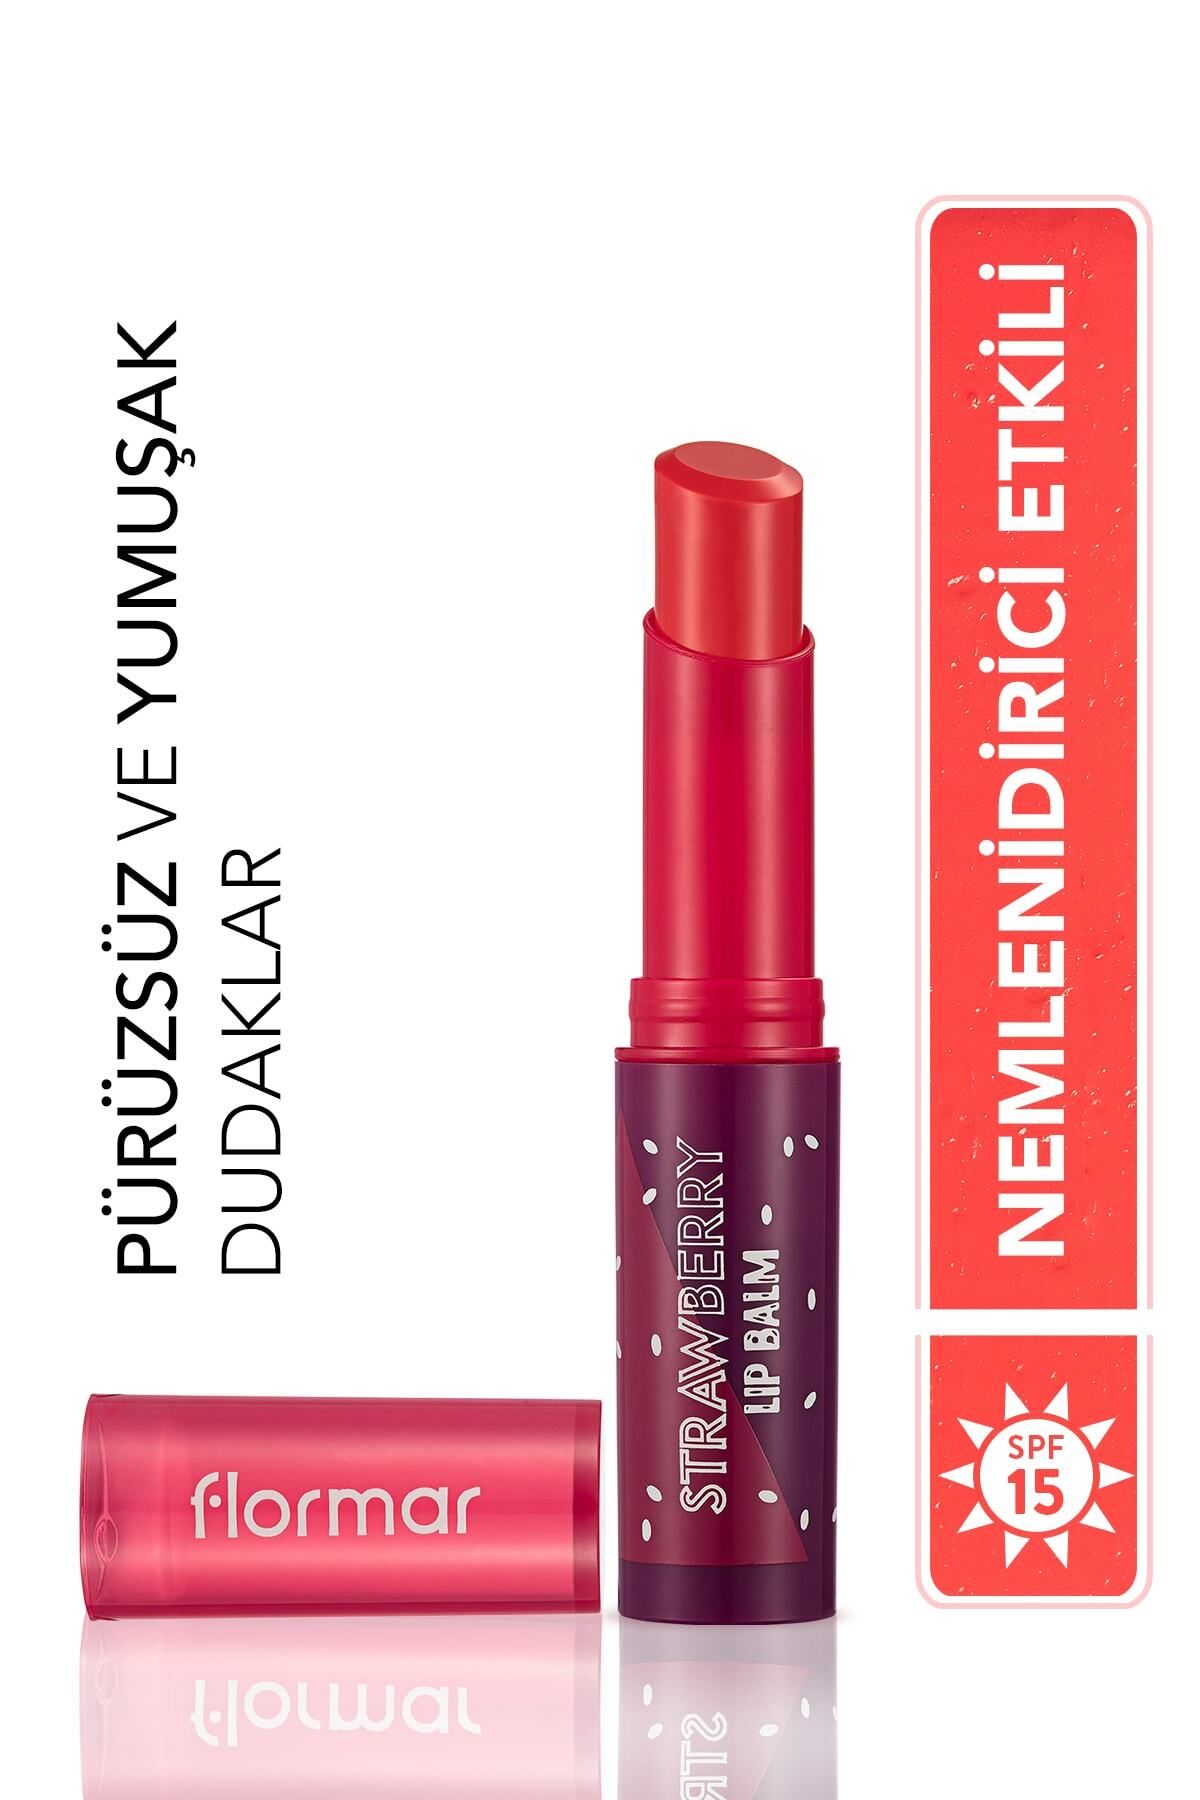 Flormar STİCK TİNTED LİP MOİSTURİZER WİTH SHEA AND COCOA BUTTER - LİP BALM -003 STRAWBERRY PSSN2585